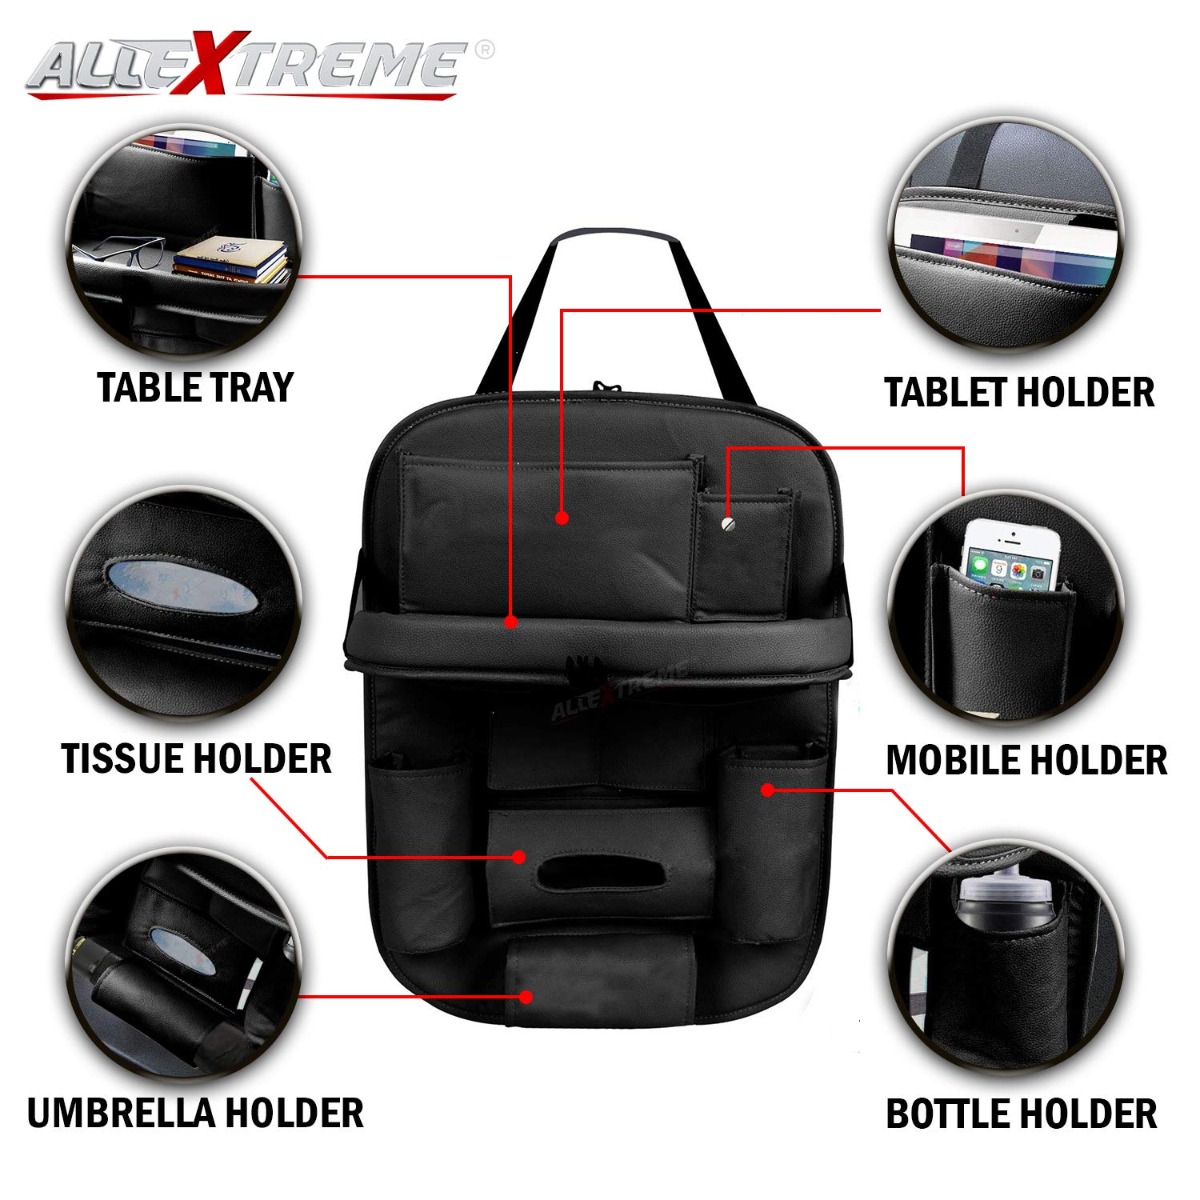 AllExtreme Universal PU Leather Auto Car Seat Back Organizer with